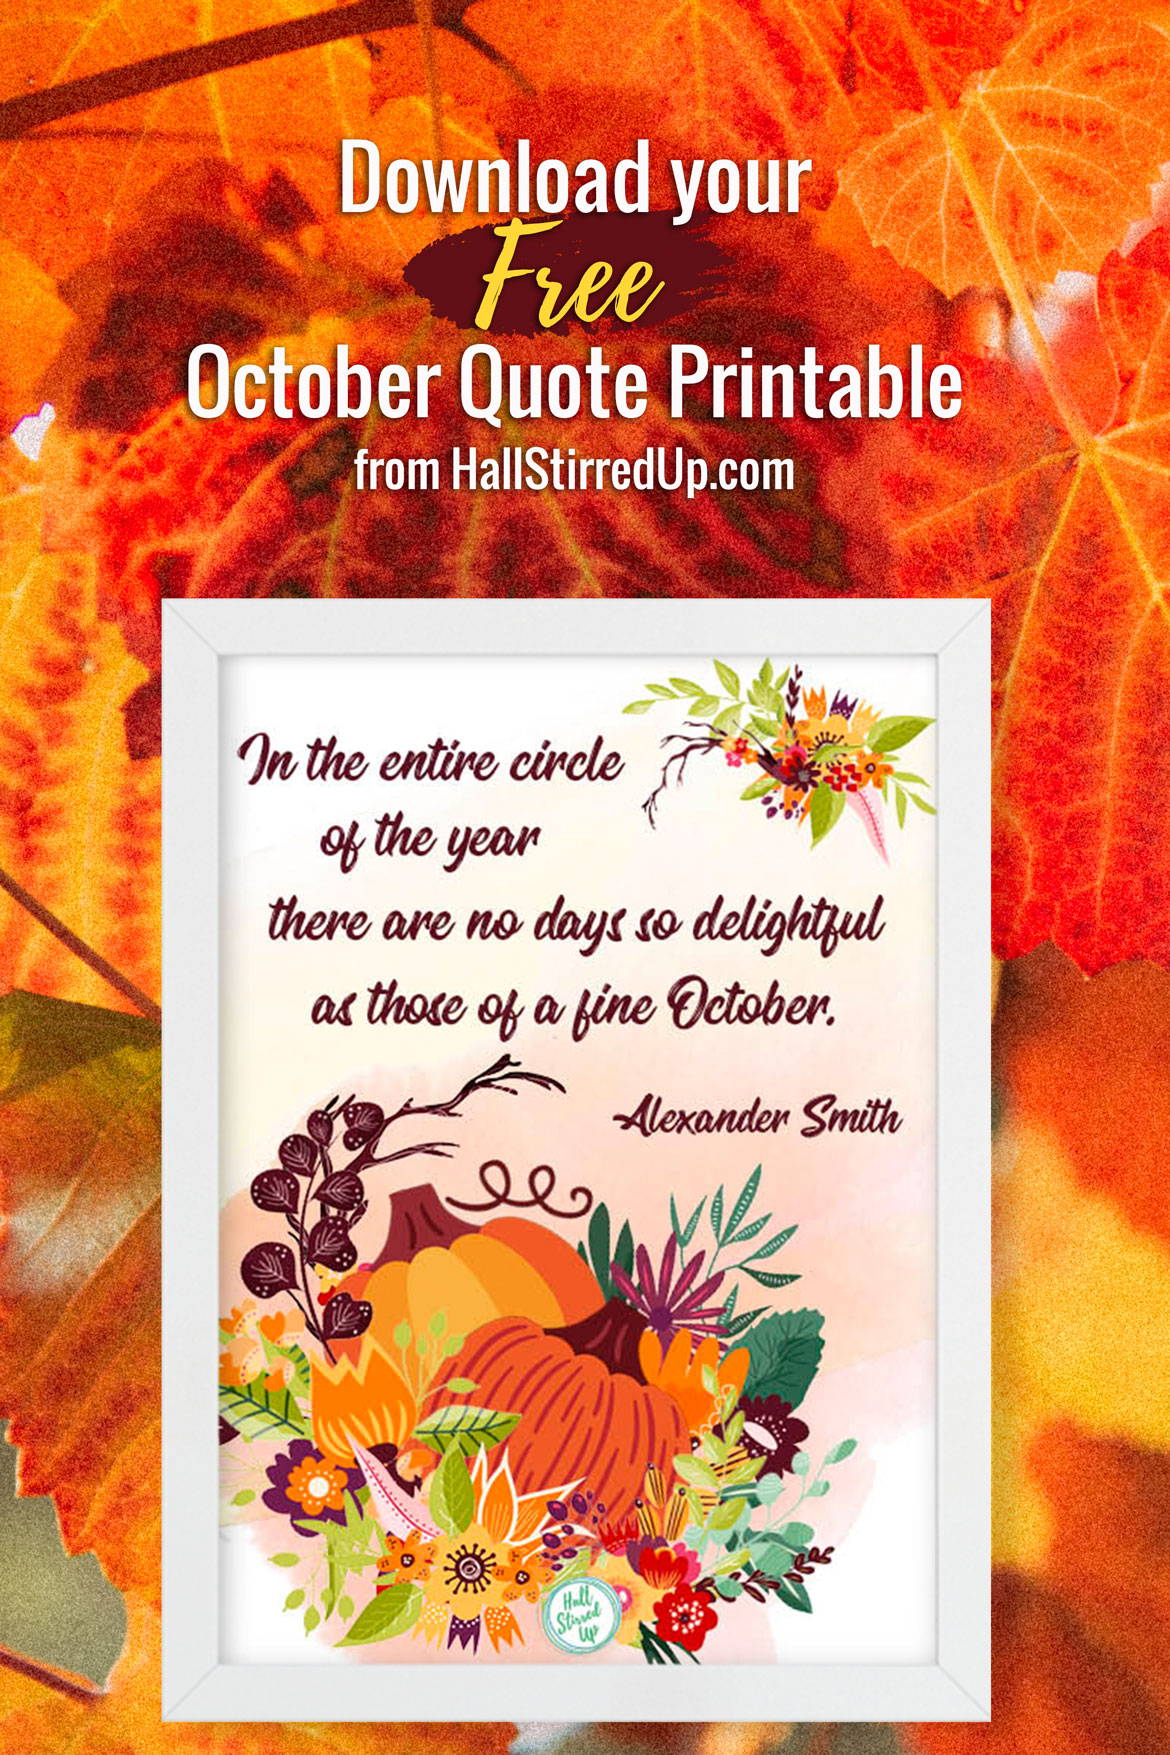 It's a fine October and time for quotes and a new printable